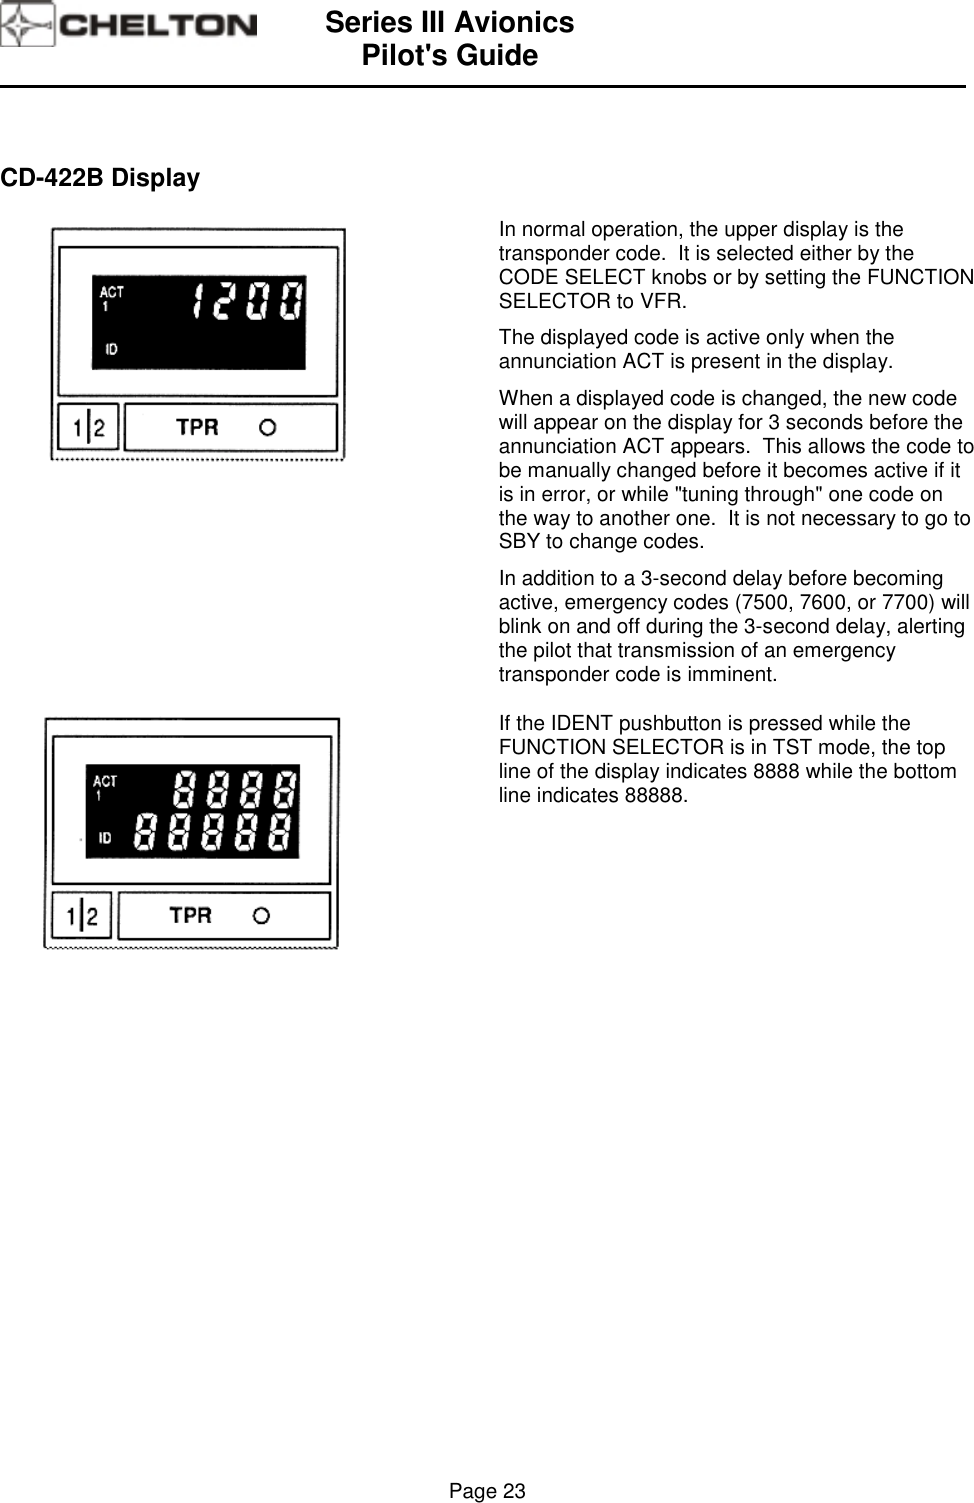 Series III AvionicsPilot&apos;s Guide                                                                                                                                          Page 23CD-422B DisplayIn normal operation, the upper display is thetransponder code.  It is selected either by theCODE SELECT knobs or by setting the FUNCTIONSELECTOR to VFR.The displayed code is active only when theannunciation ACT is present in the display.When a displayed code is changed, the new codewill appear on the display for 3 seconds before theannunciation ACT appears.  This allows the code tobe manually changed before it becomes active if itis in error, or while &quot;tuning through&quot; one code onthe way to another one.  It is not necessary to go toSBY to change codes.In addition to a 3-second delay before becomingactive, emergency codes (7500, 7600, or 7700) willblink on and off during the 3-second delay, alertingthe pilot that transmission of an emergencytransponder code is imminent.If the IDENT pushbutton is pressed while theFUNCTION SELECTOR is in TST mode, the topline of the display indicates 8888 while the bottomline indicates 88888.